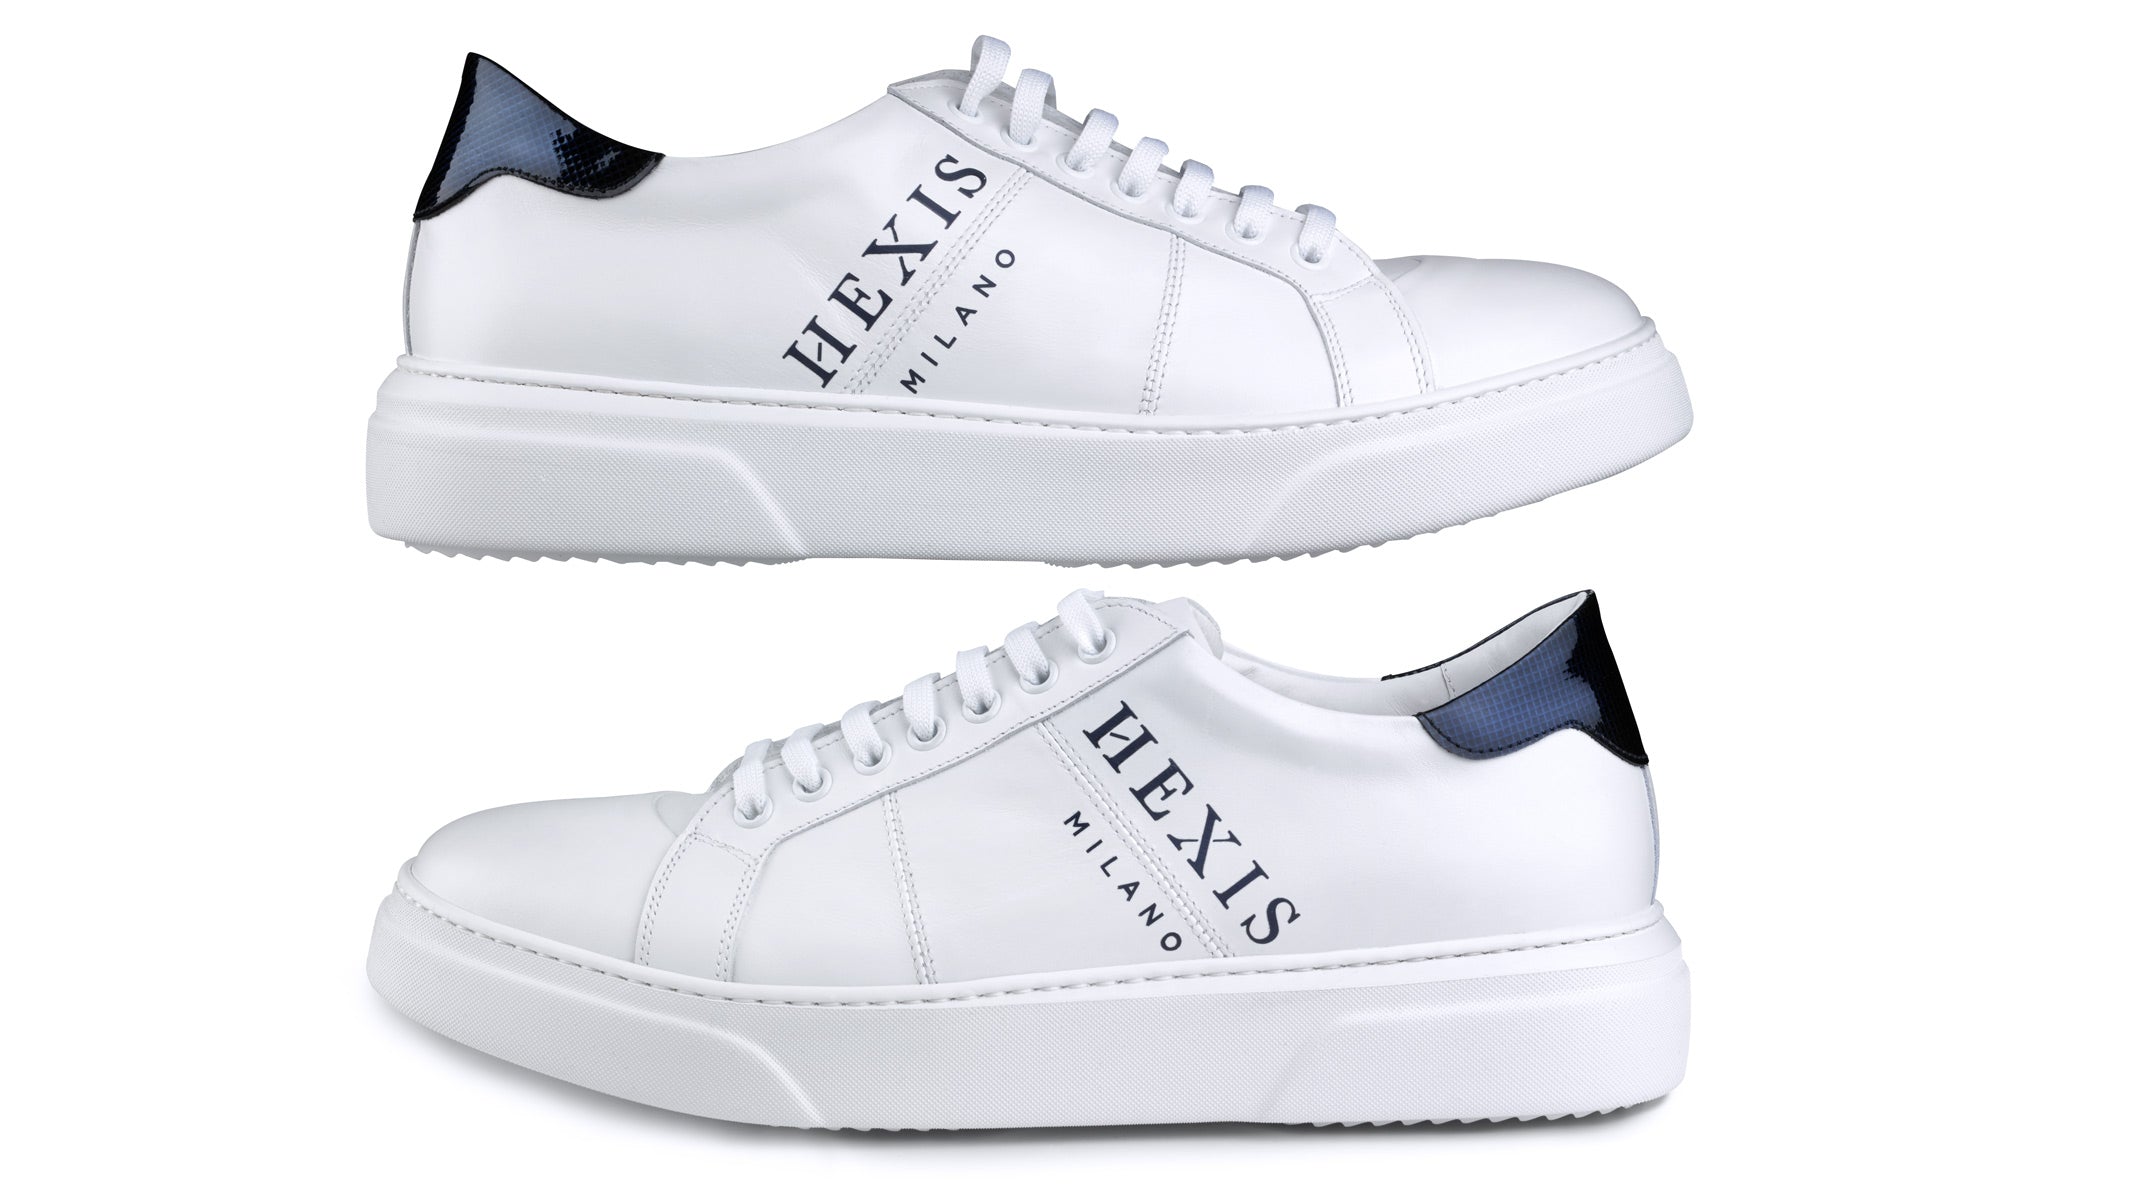 Hexis sneakers in white leather